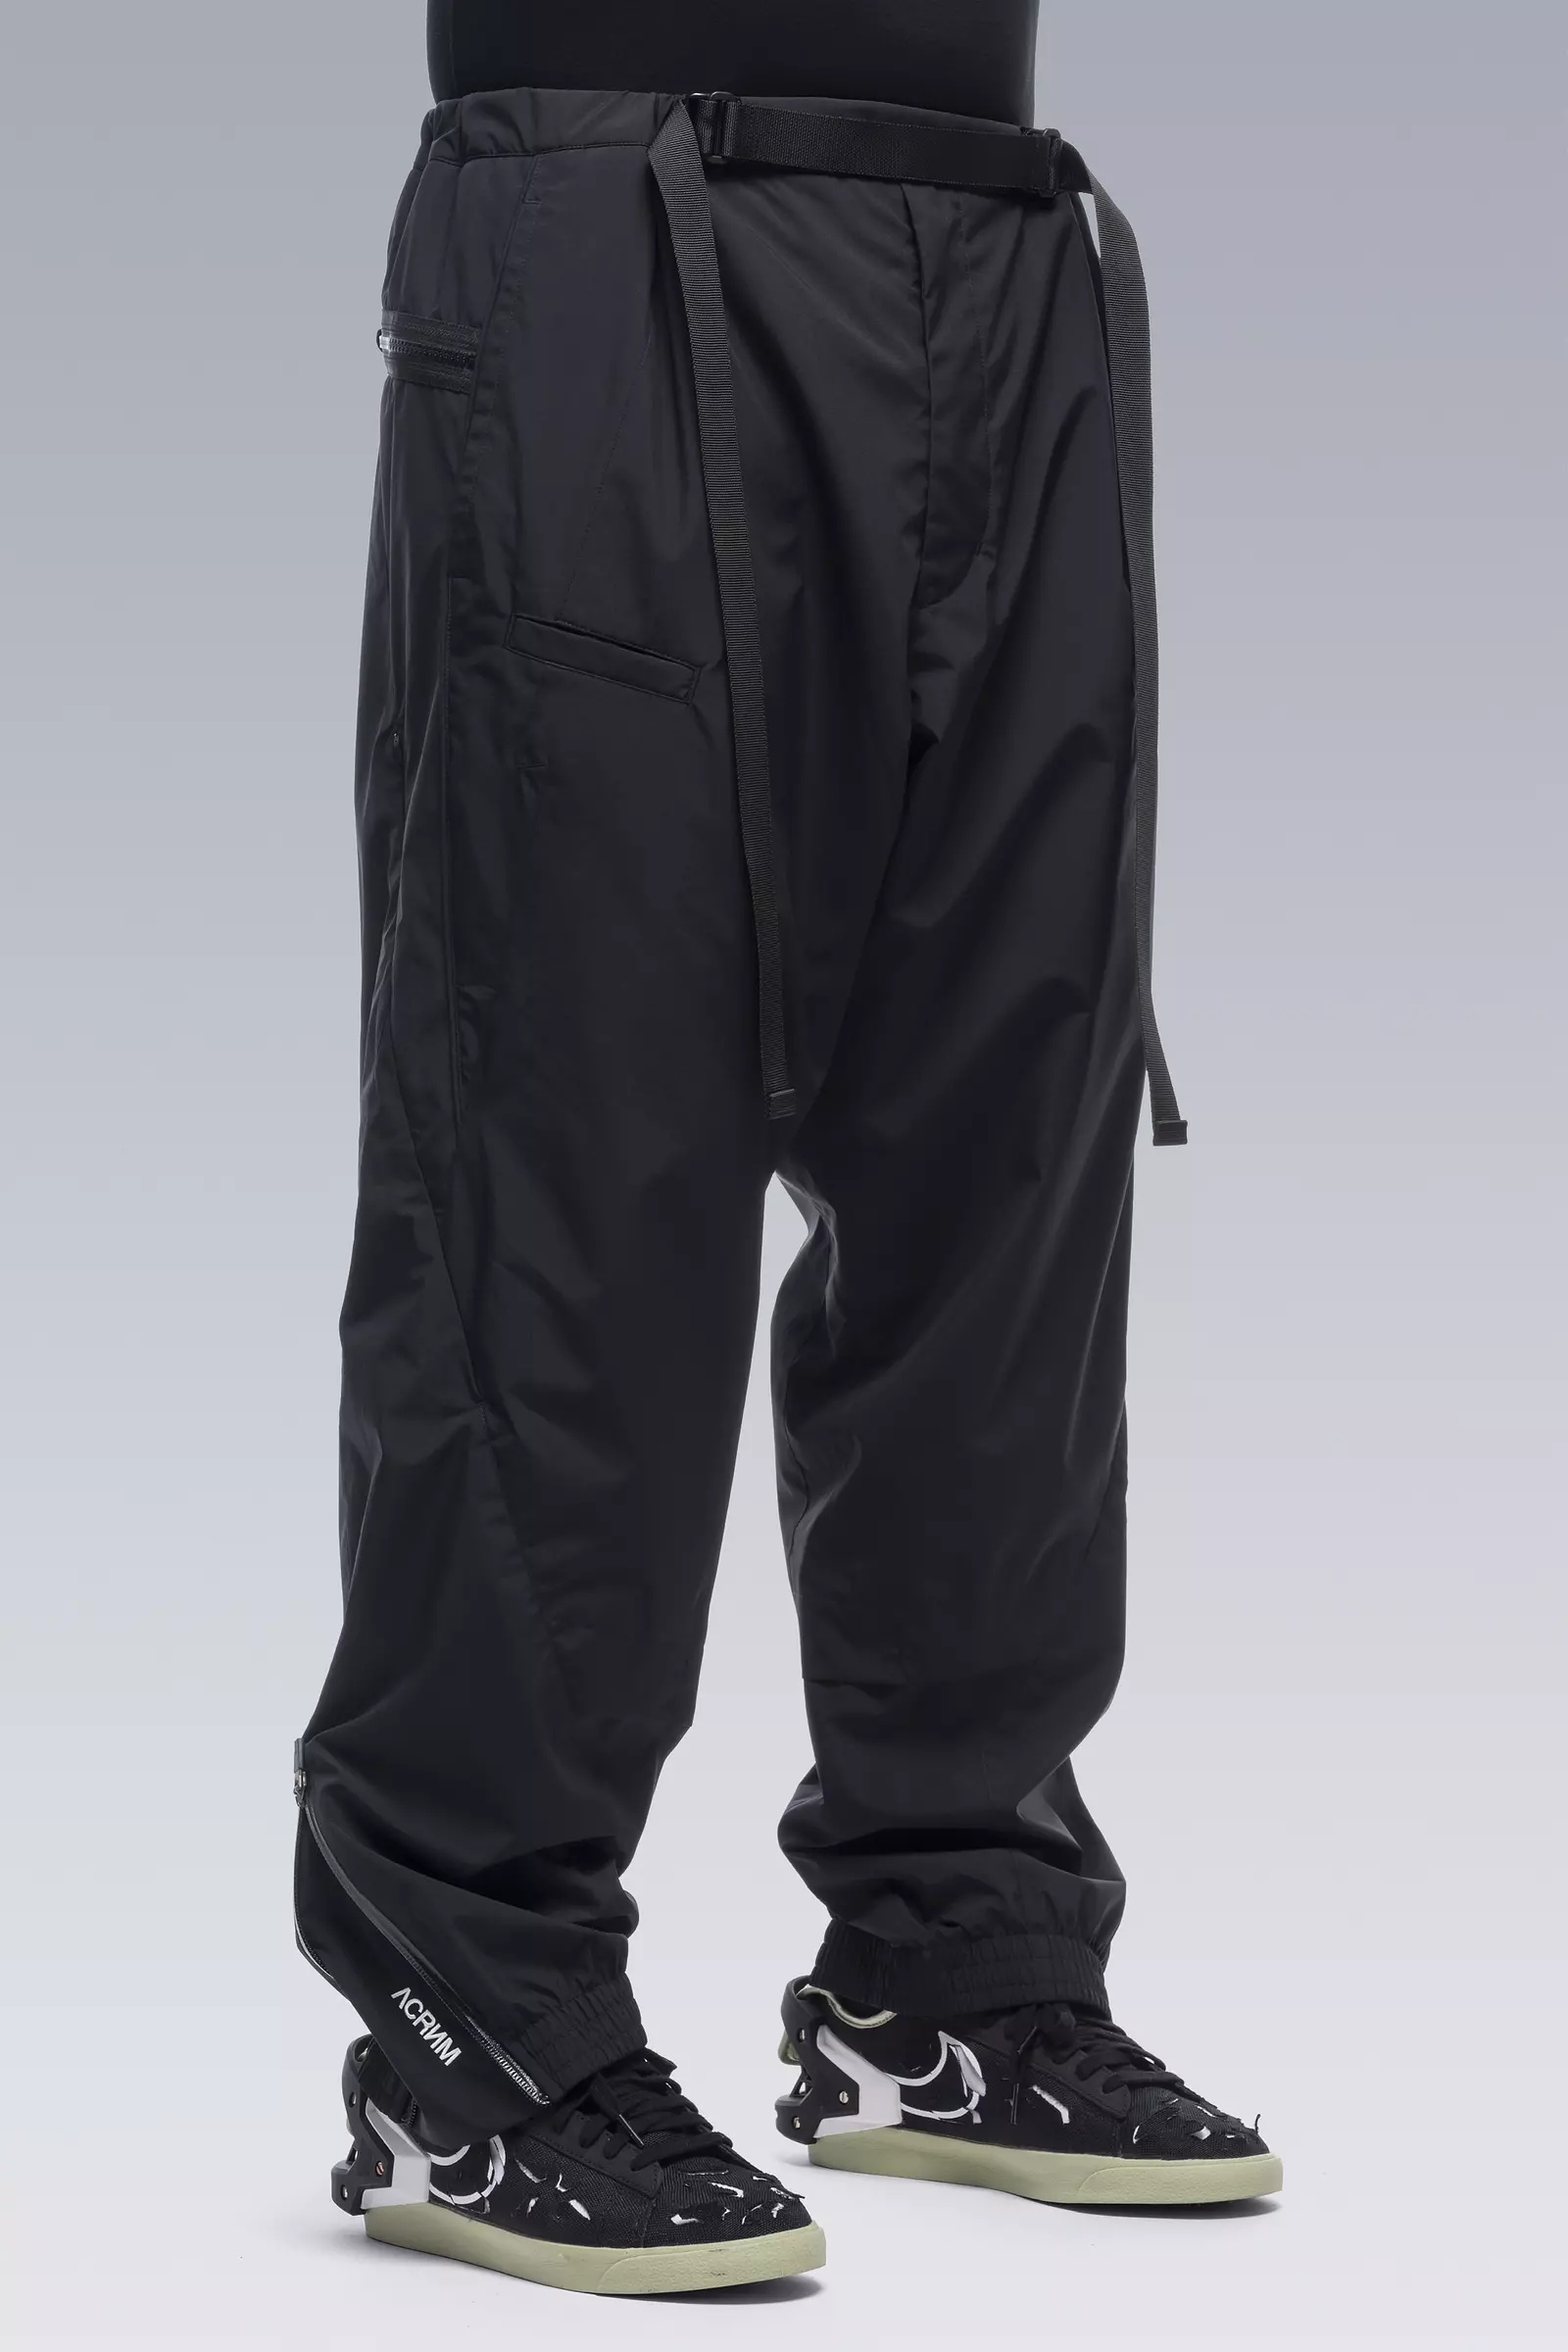 P53-WS 2L Gore-Tex® Windstopper® Insulated Vent Pants Black - 3